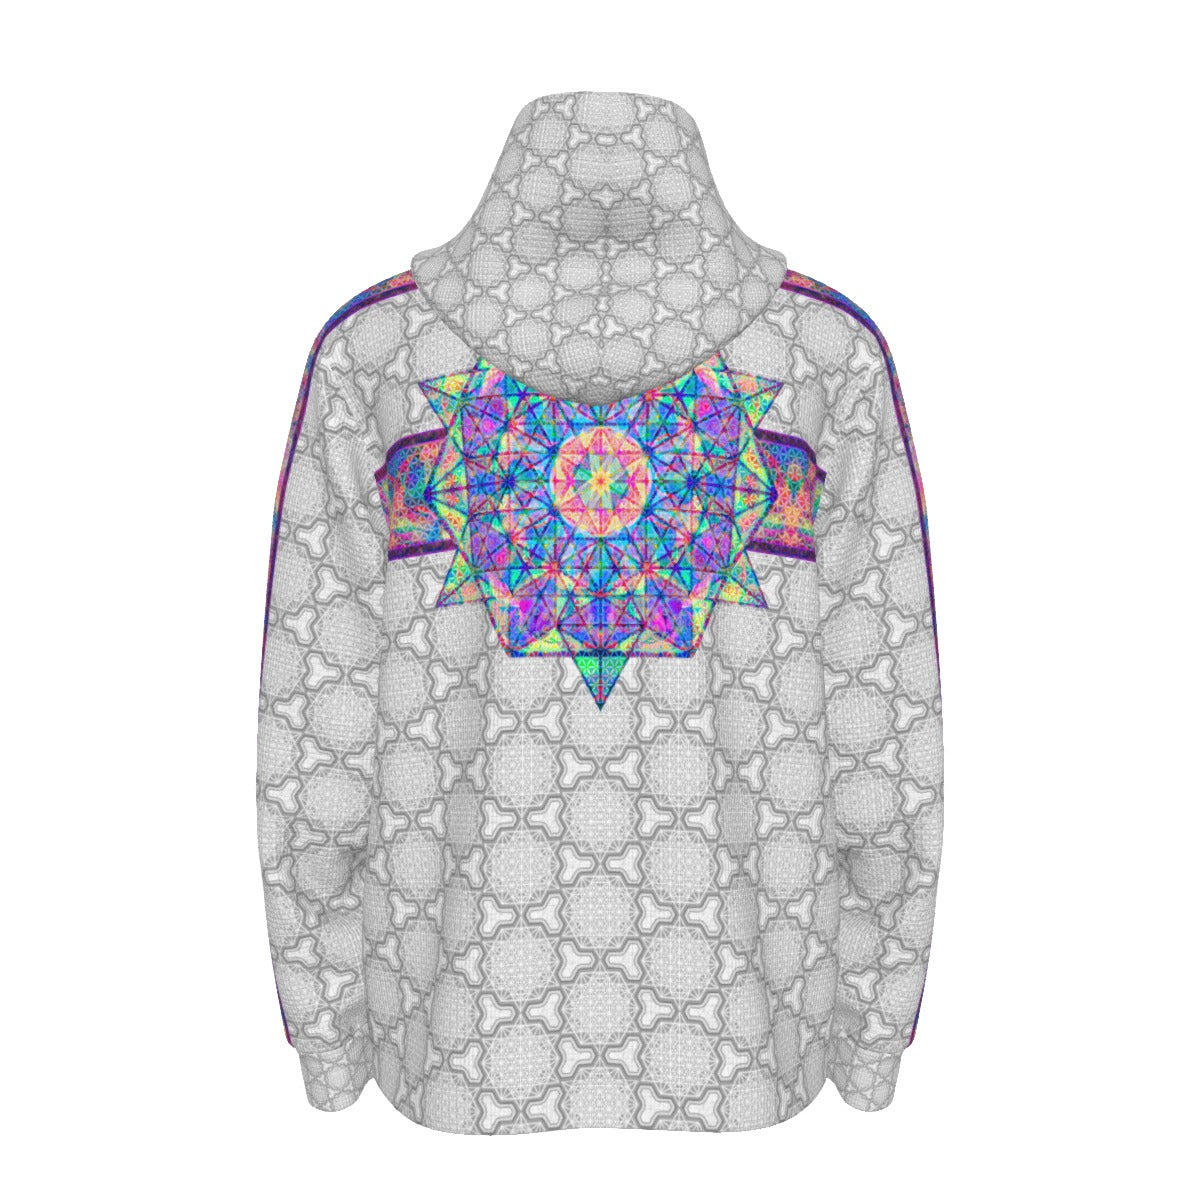 64 Point Star Tetrahedron Day Trip Plush Hoodie Tracksuit Top